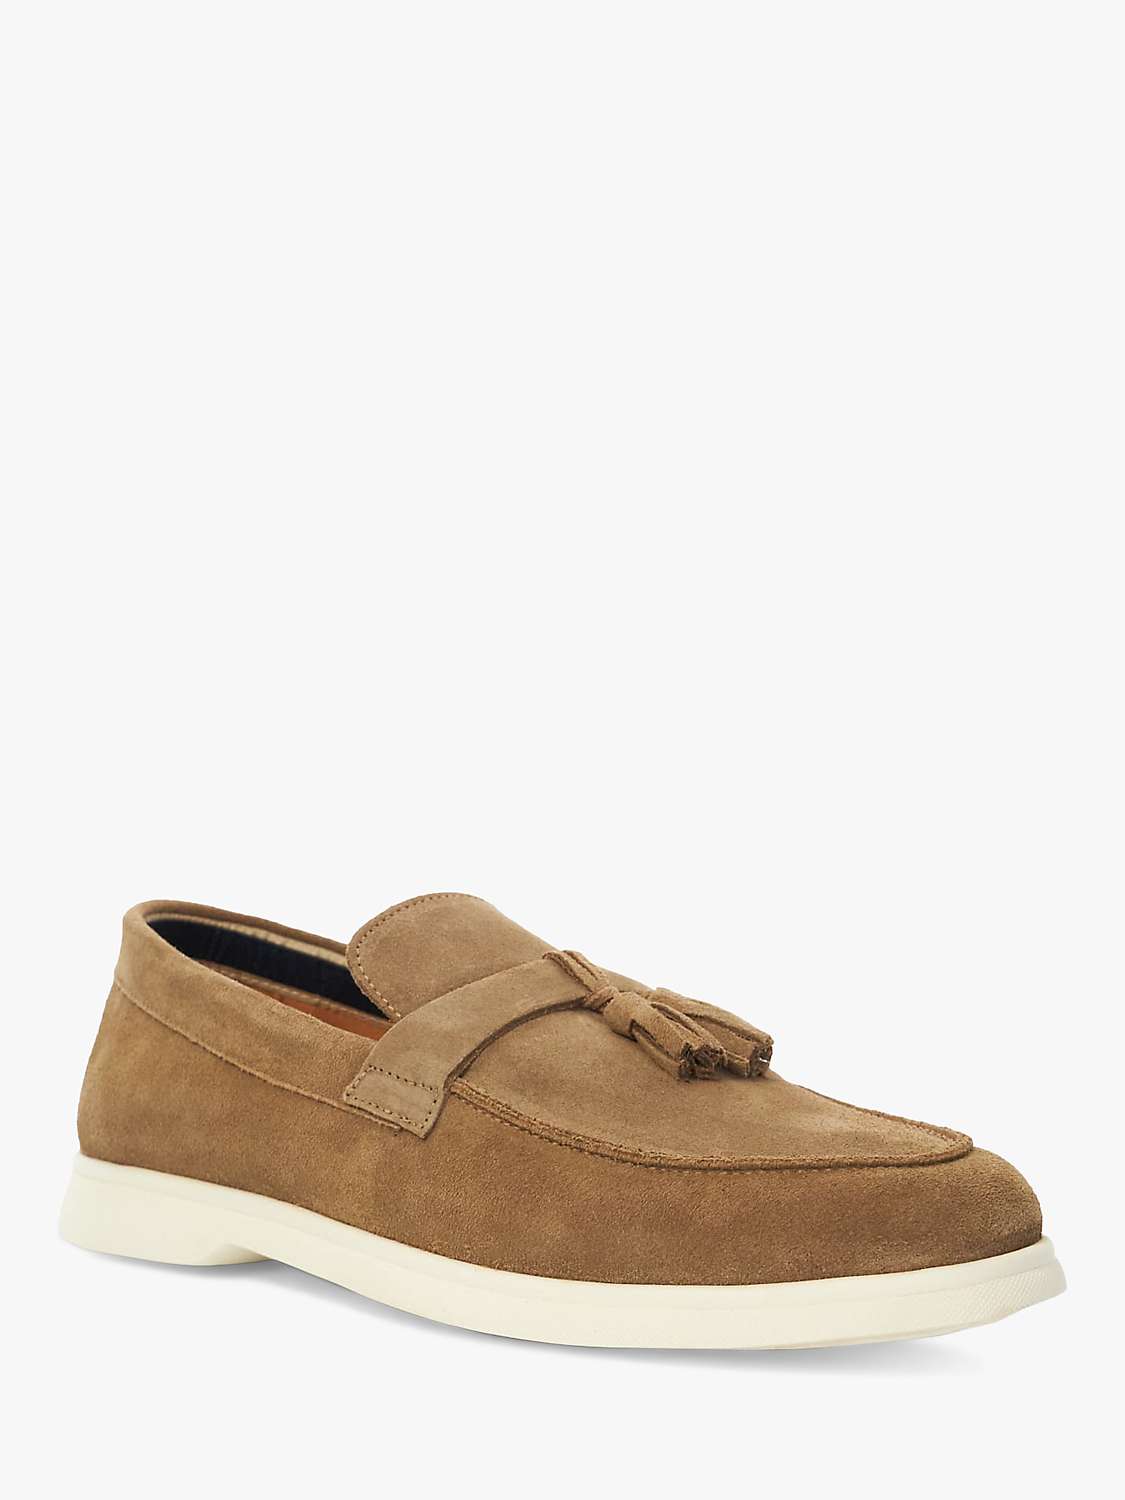 Buy Dune Believes Top Stitch Tassle Loafers, Taupe Online at johnlewis.com